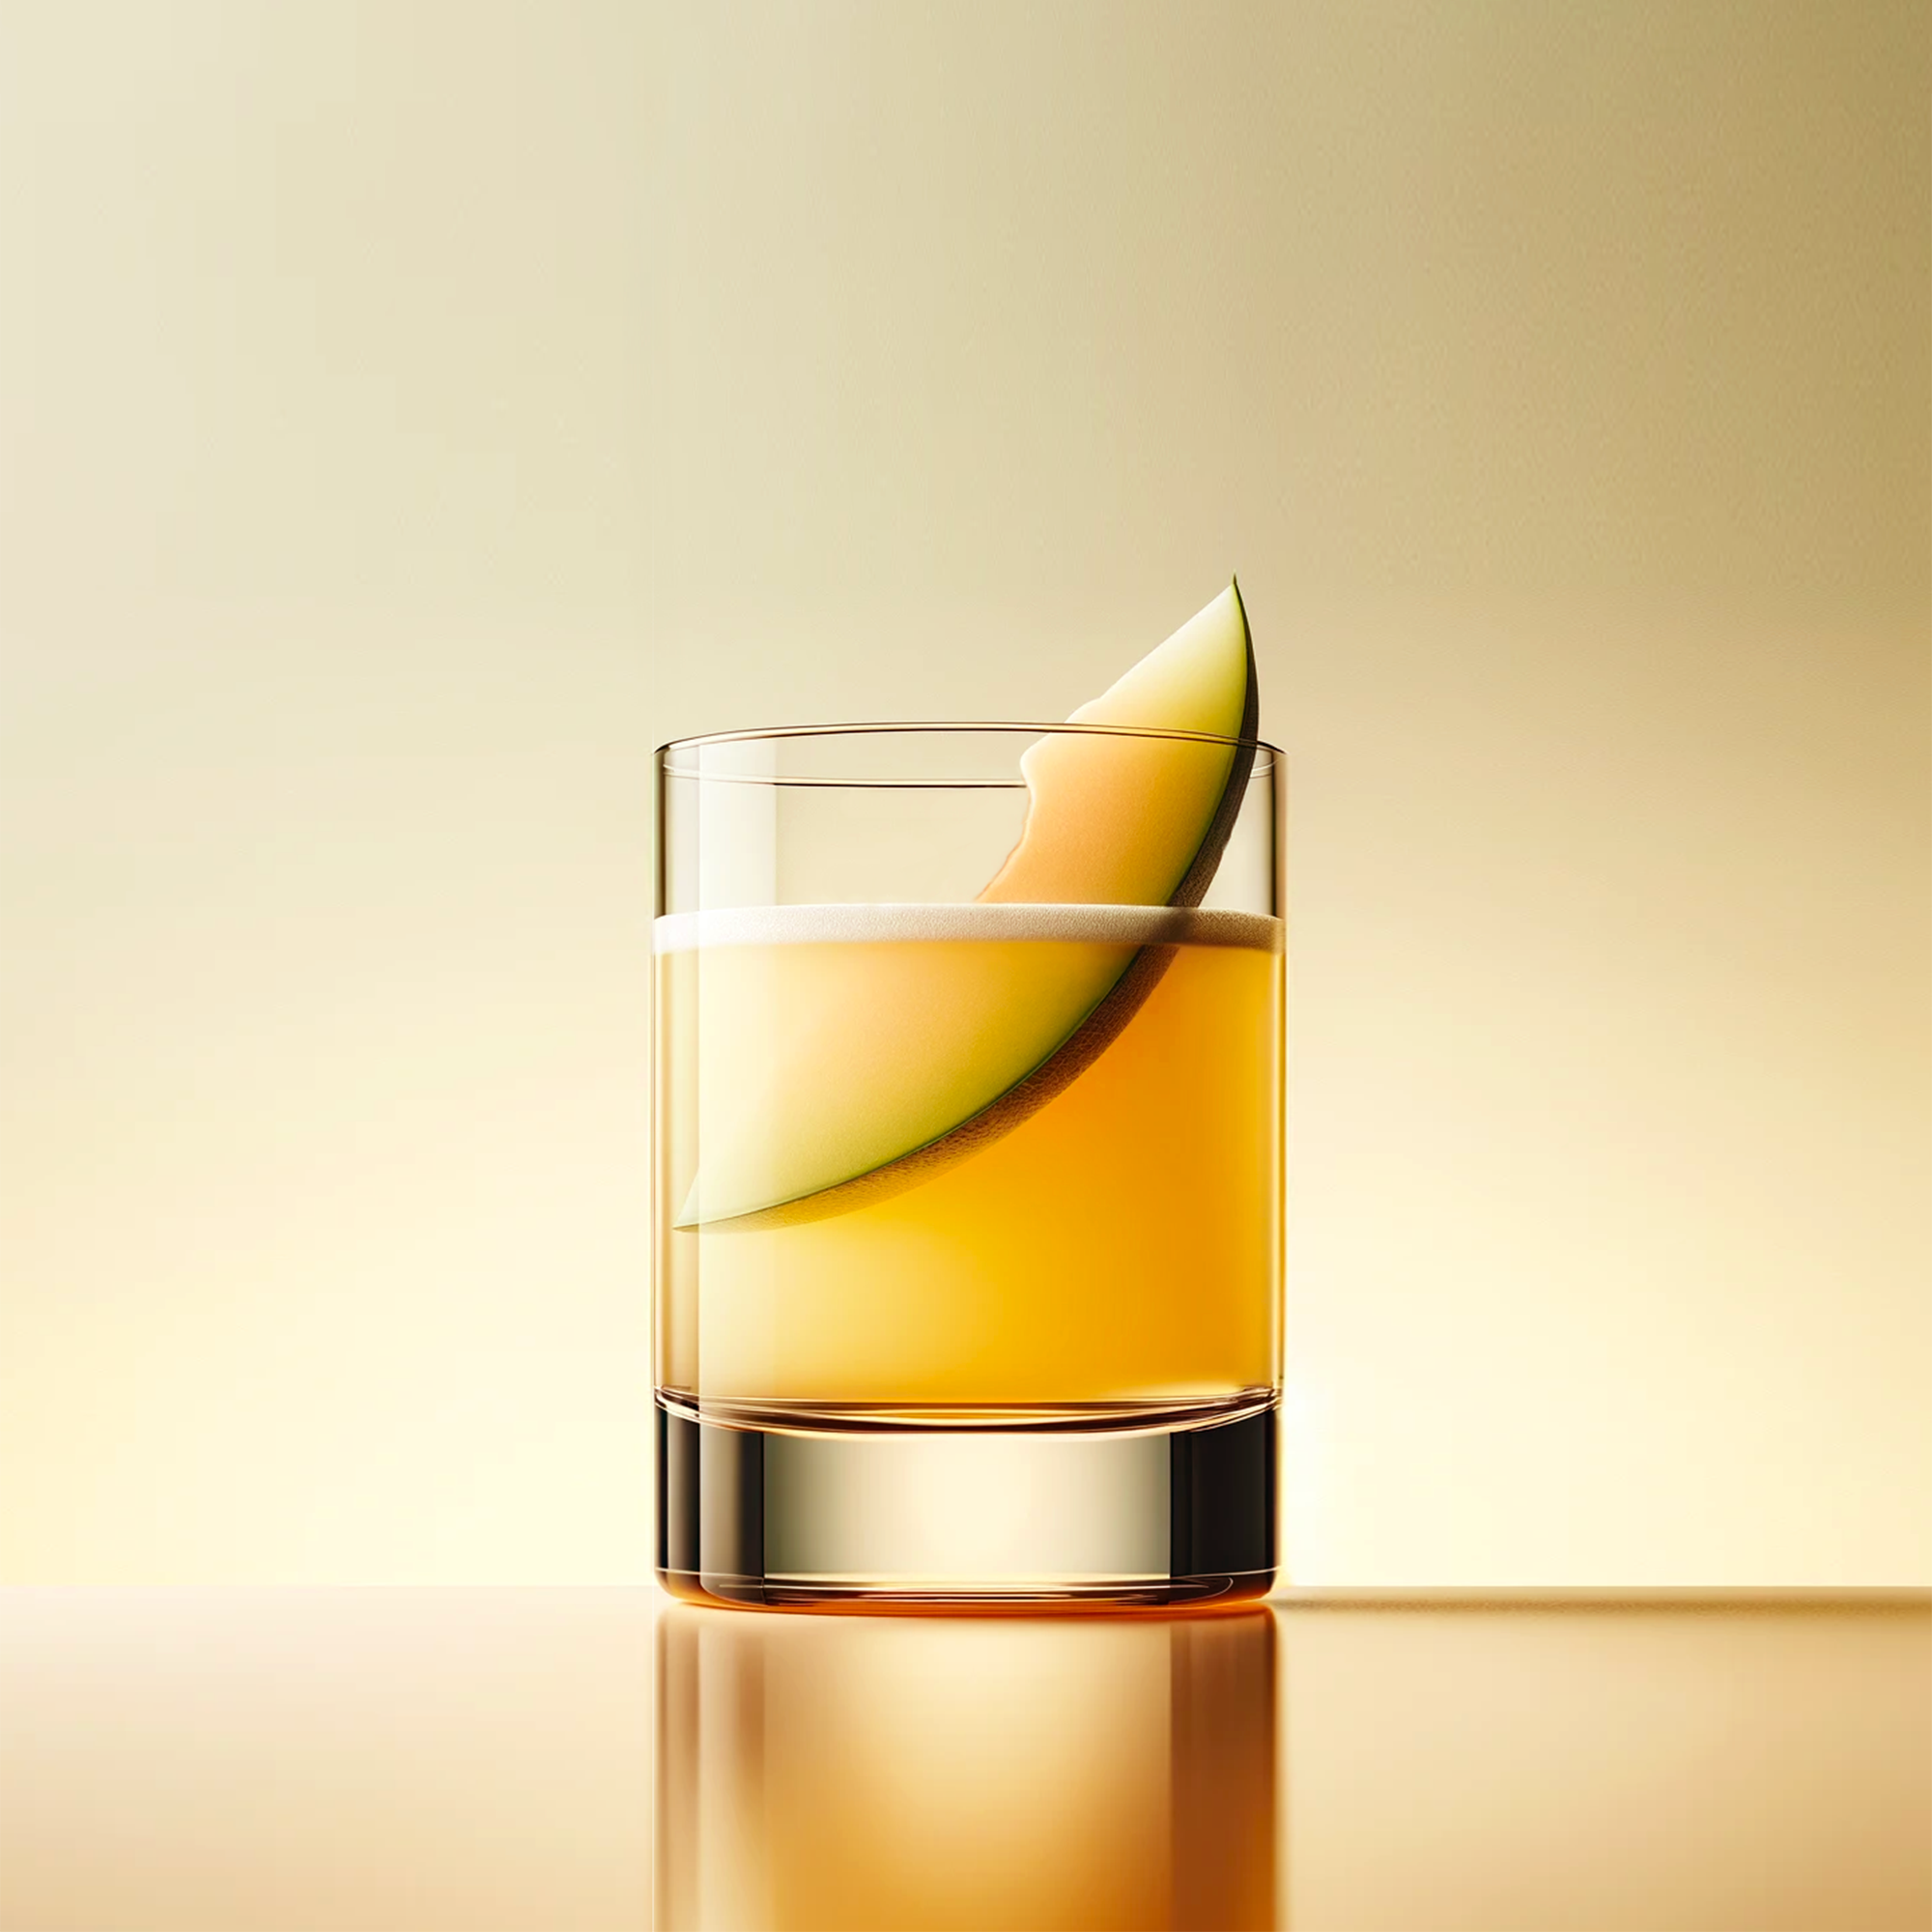 Tom Collins in a whisky old fashioned glass. Beverage is orange and has melon inside. Background is muted orange and yellow